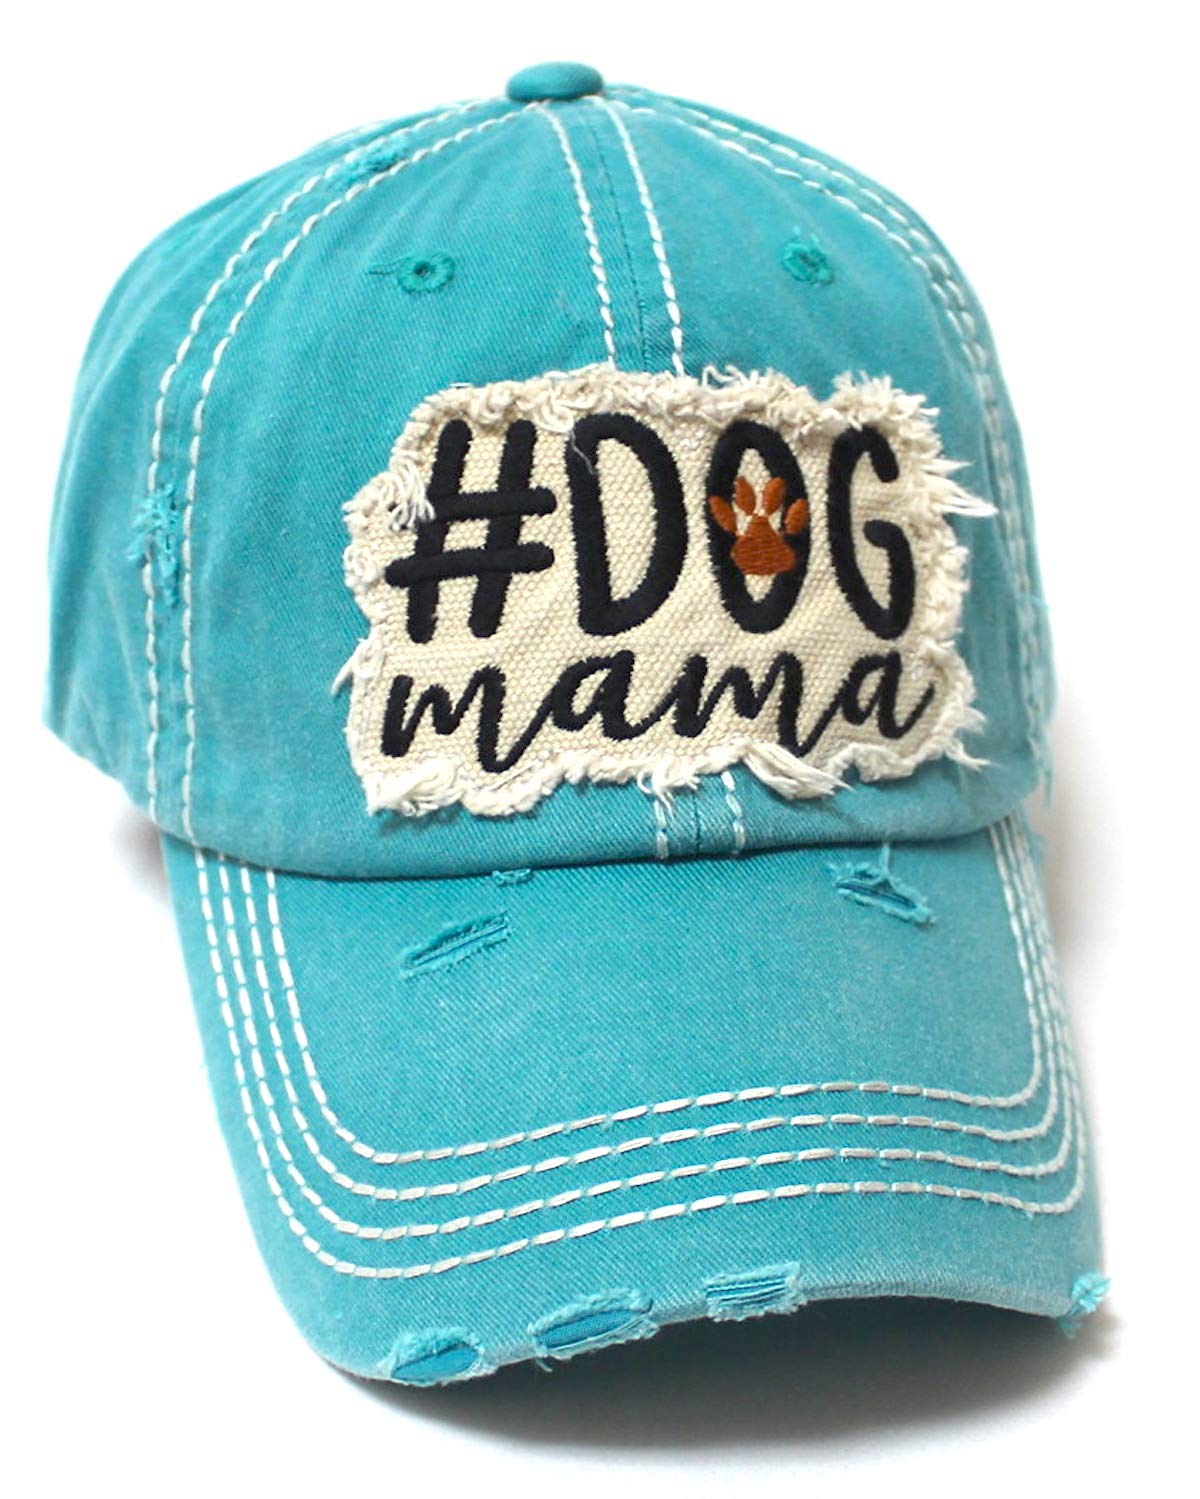 Women's Ballcap #Dog Mama Paw Print Patch Embroidery Unconstructed Hat, Turquoise - Caps 'N Vintage 